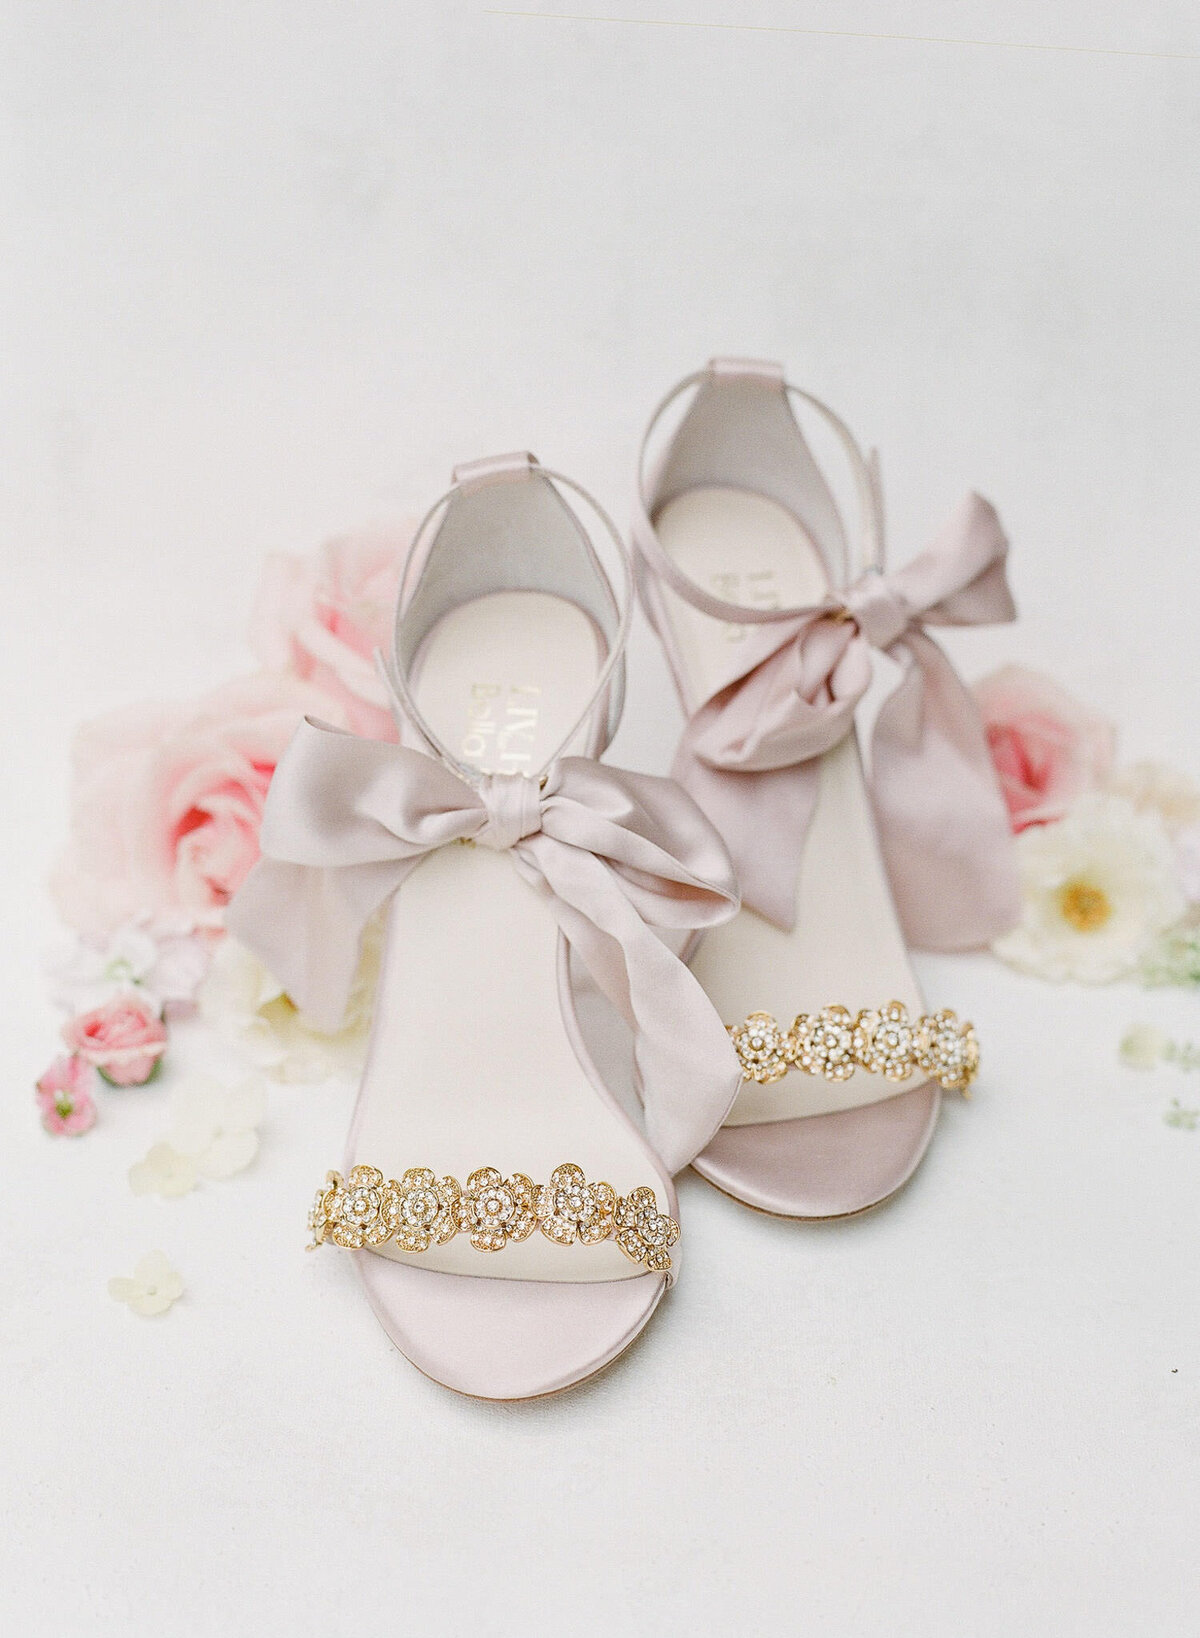 bella belle wedding shoes at the paine art center